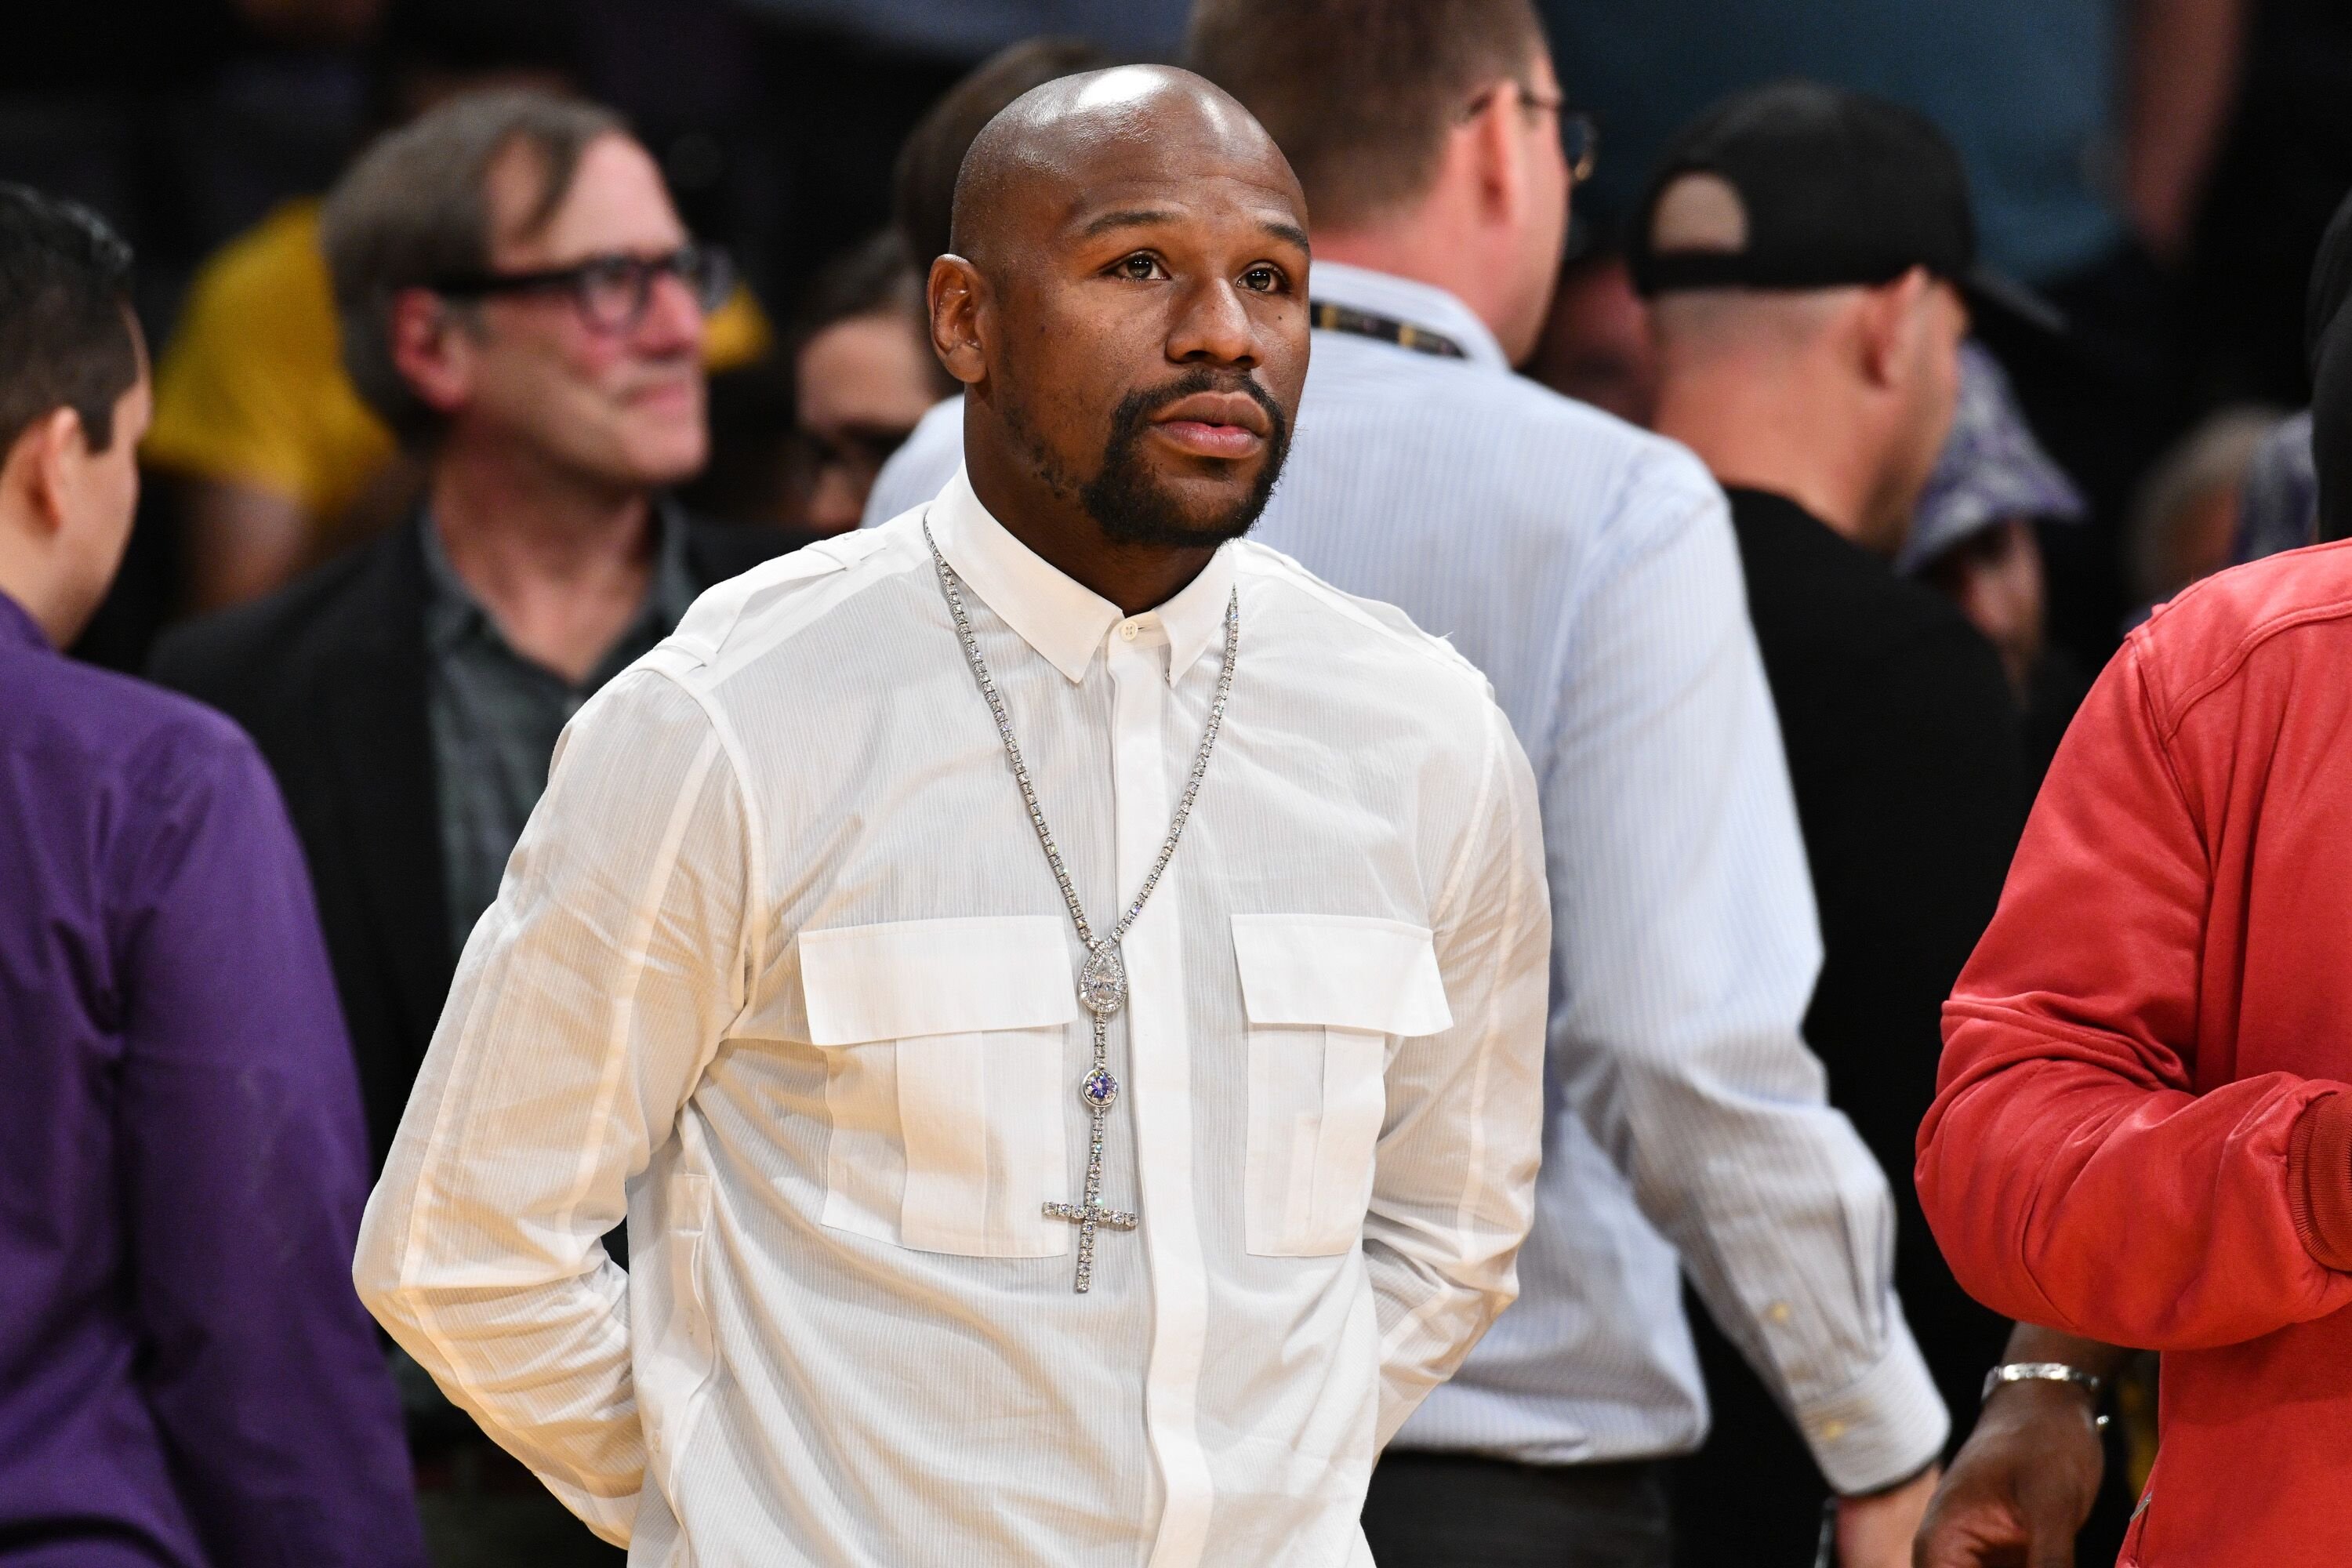 Floyd Mayweather Jr. attends a basketball game between the Los Angeles Lakers and the Atlanta Hawks at Staples Center on November 11, 2018 in Los Angeles, California. | Source: Getty Images